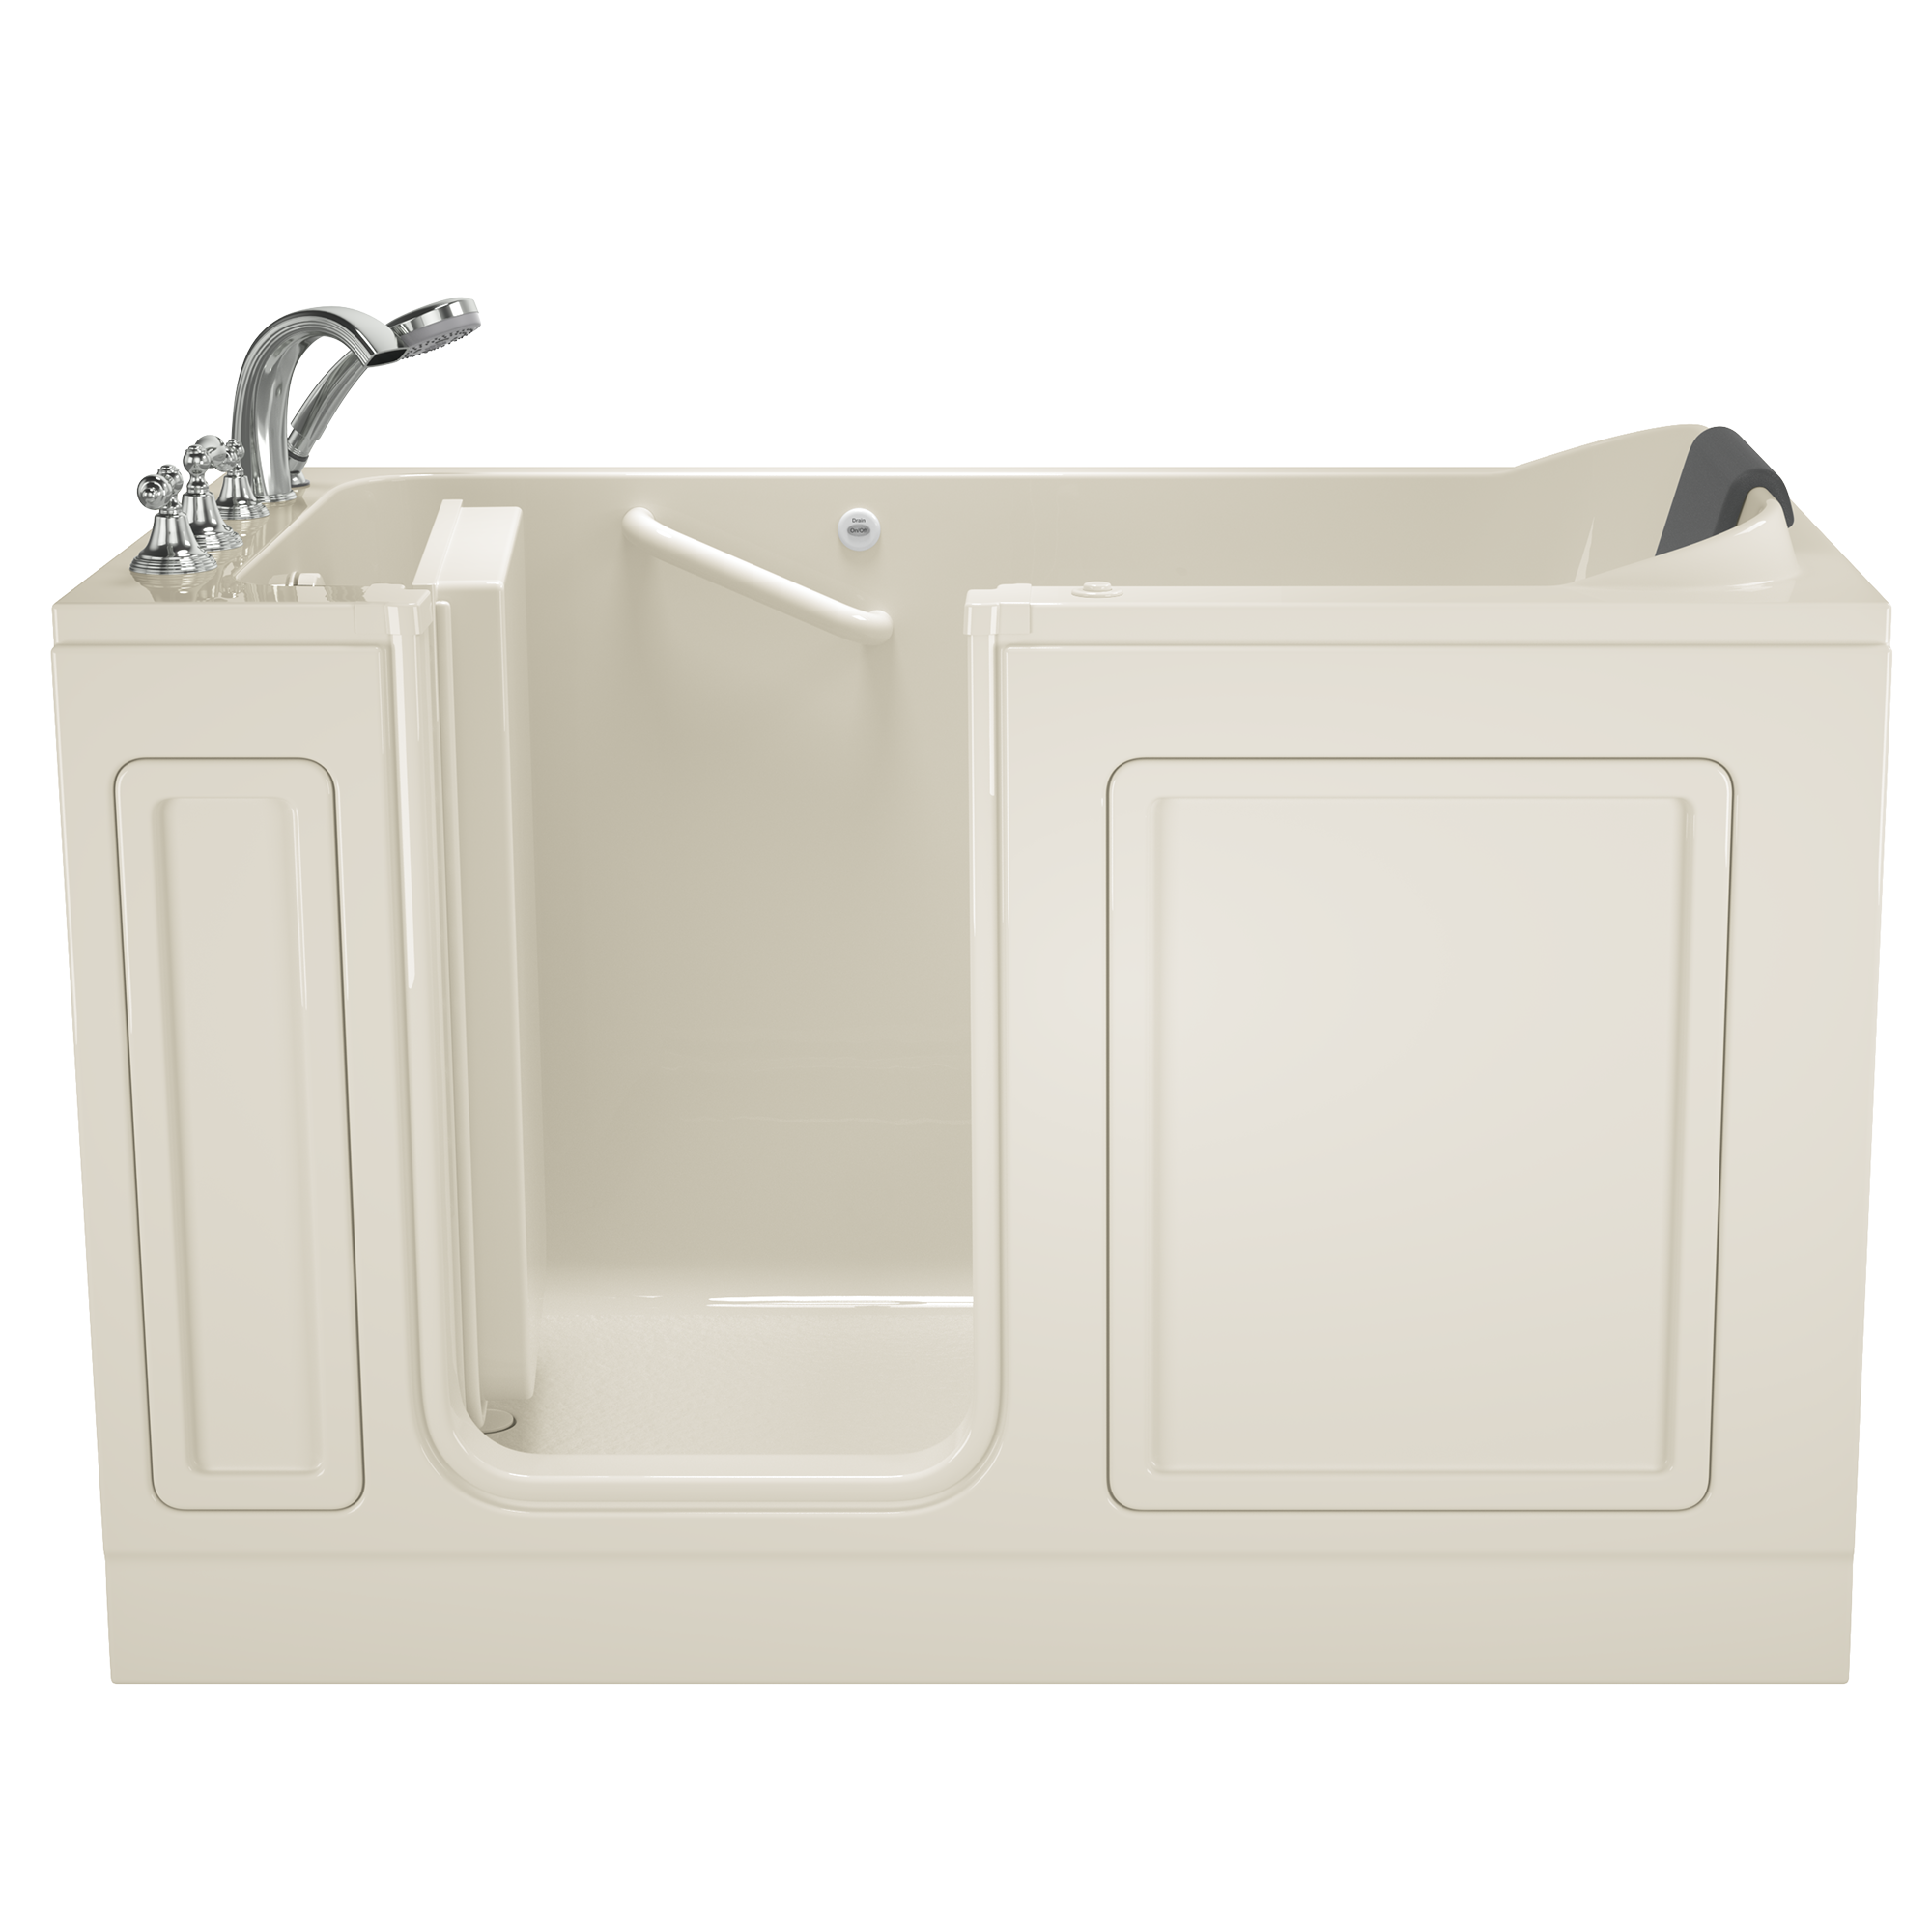 Acrylic Luxury Series 32 x 60 -Inch Walk-in Tub With Air Spa System - Left-Hand Drain With Faucet